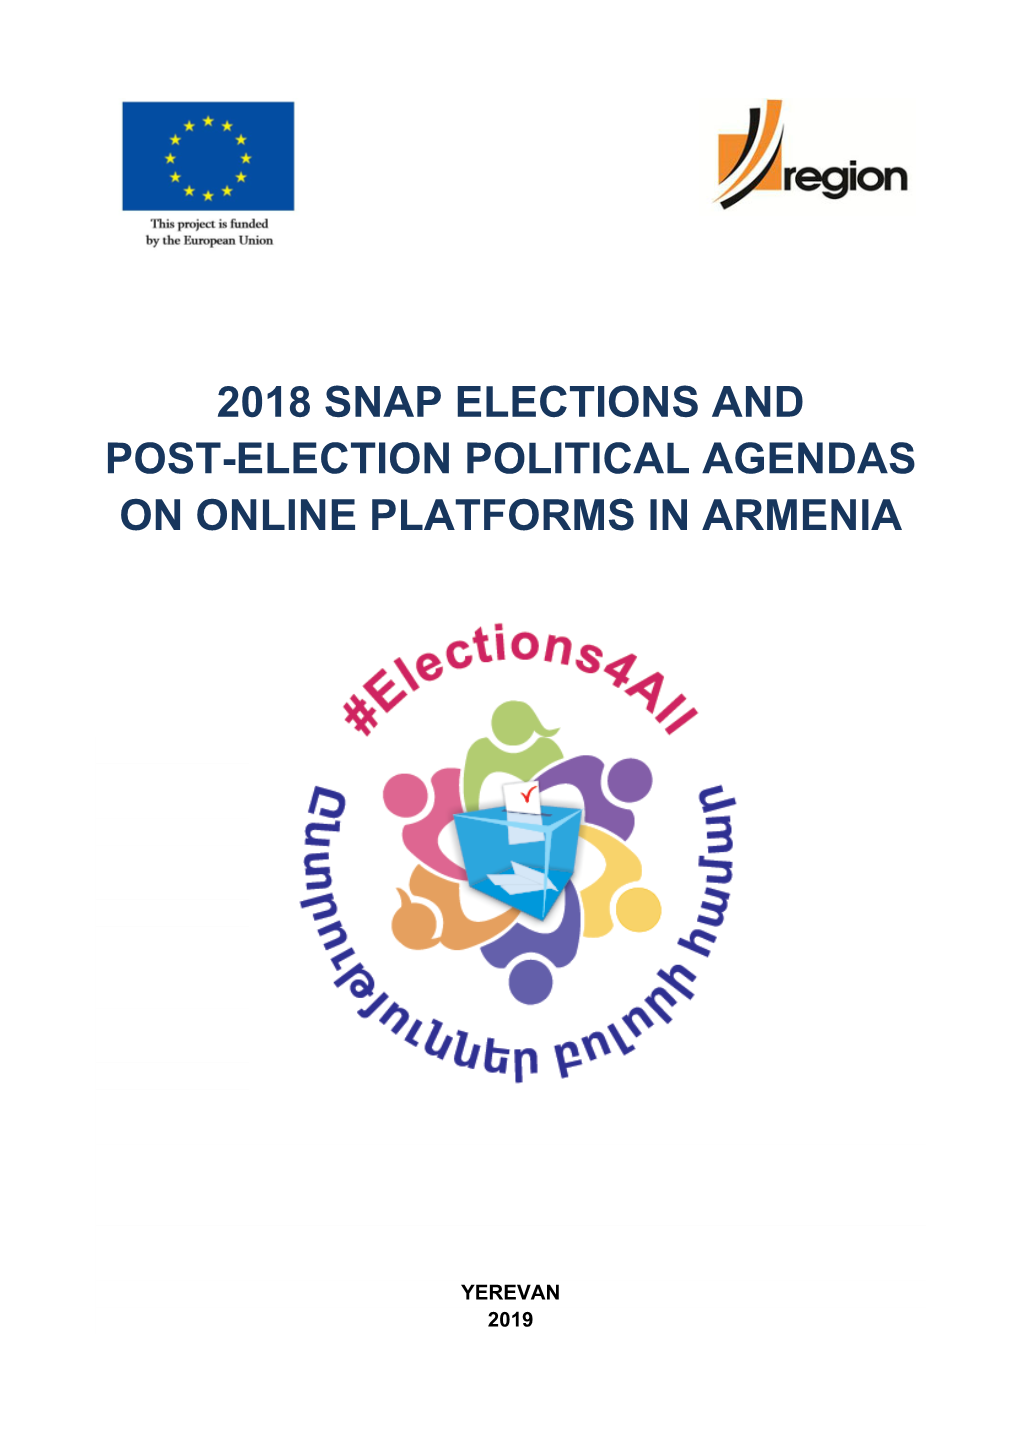 2018 Snap Elections and Post-Election Political Agendas on Online Platforms in Armenia